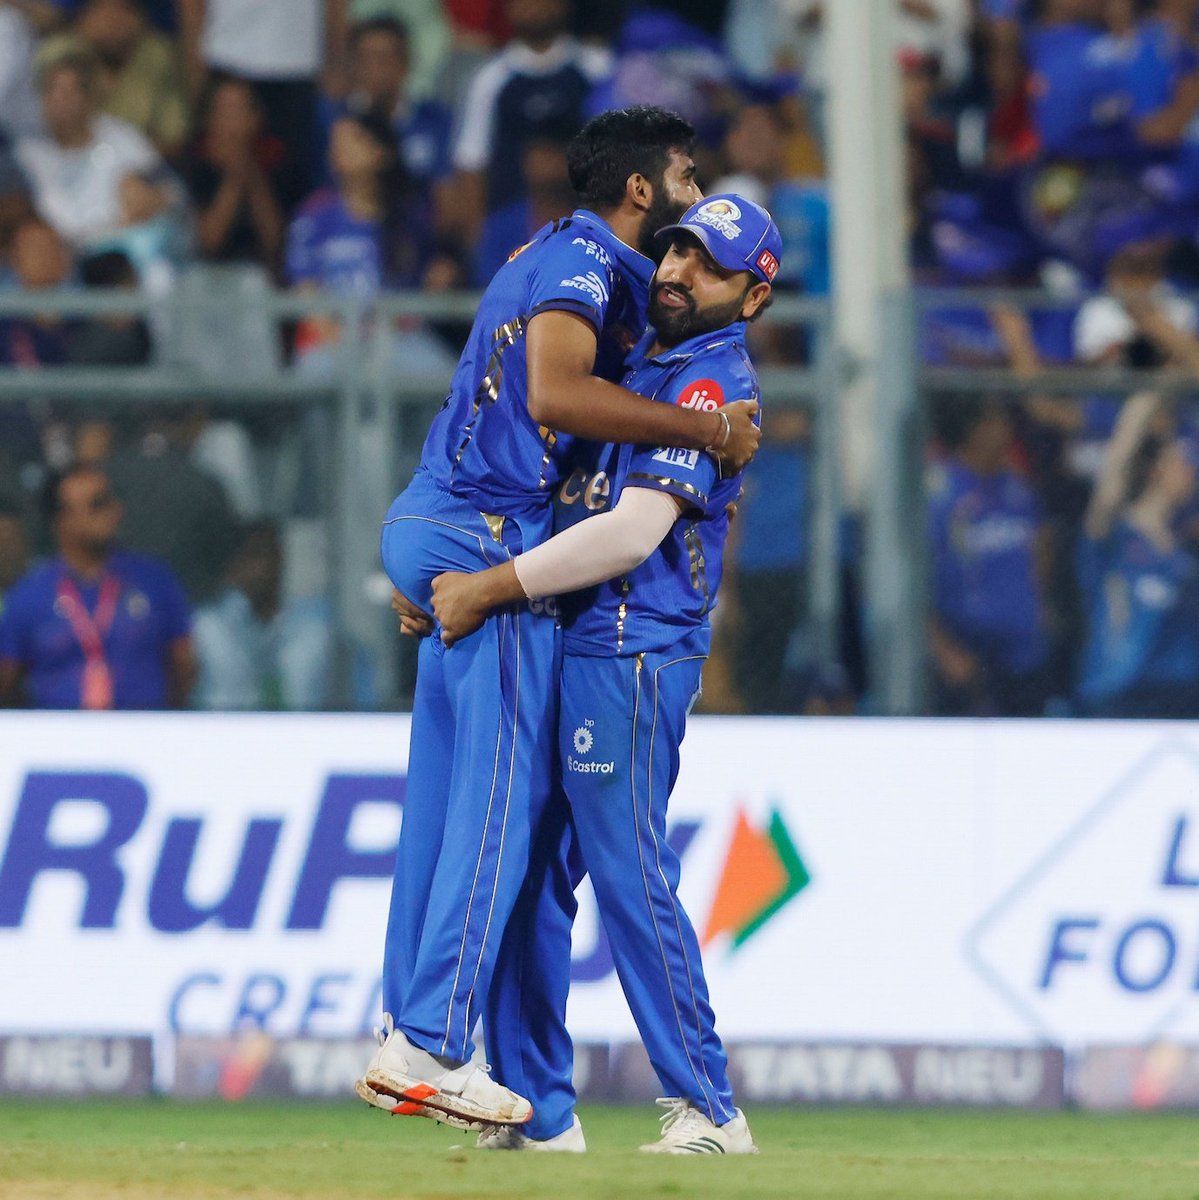 Rohit Sharma hugging Bumrah after a terrific spell. - Frame of the day. ⭐